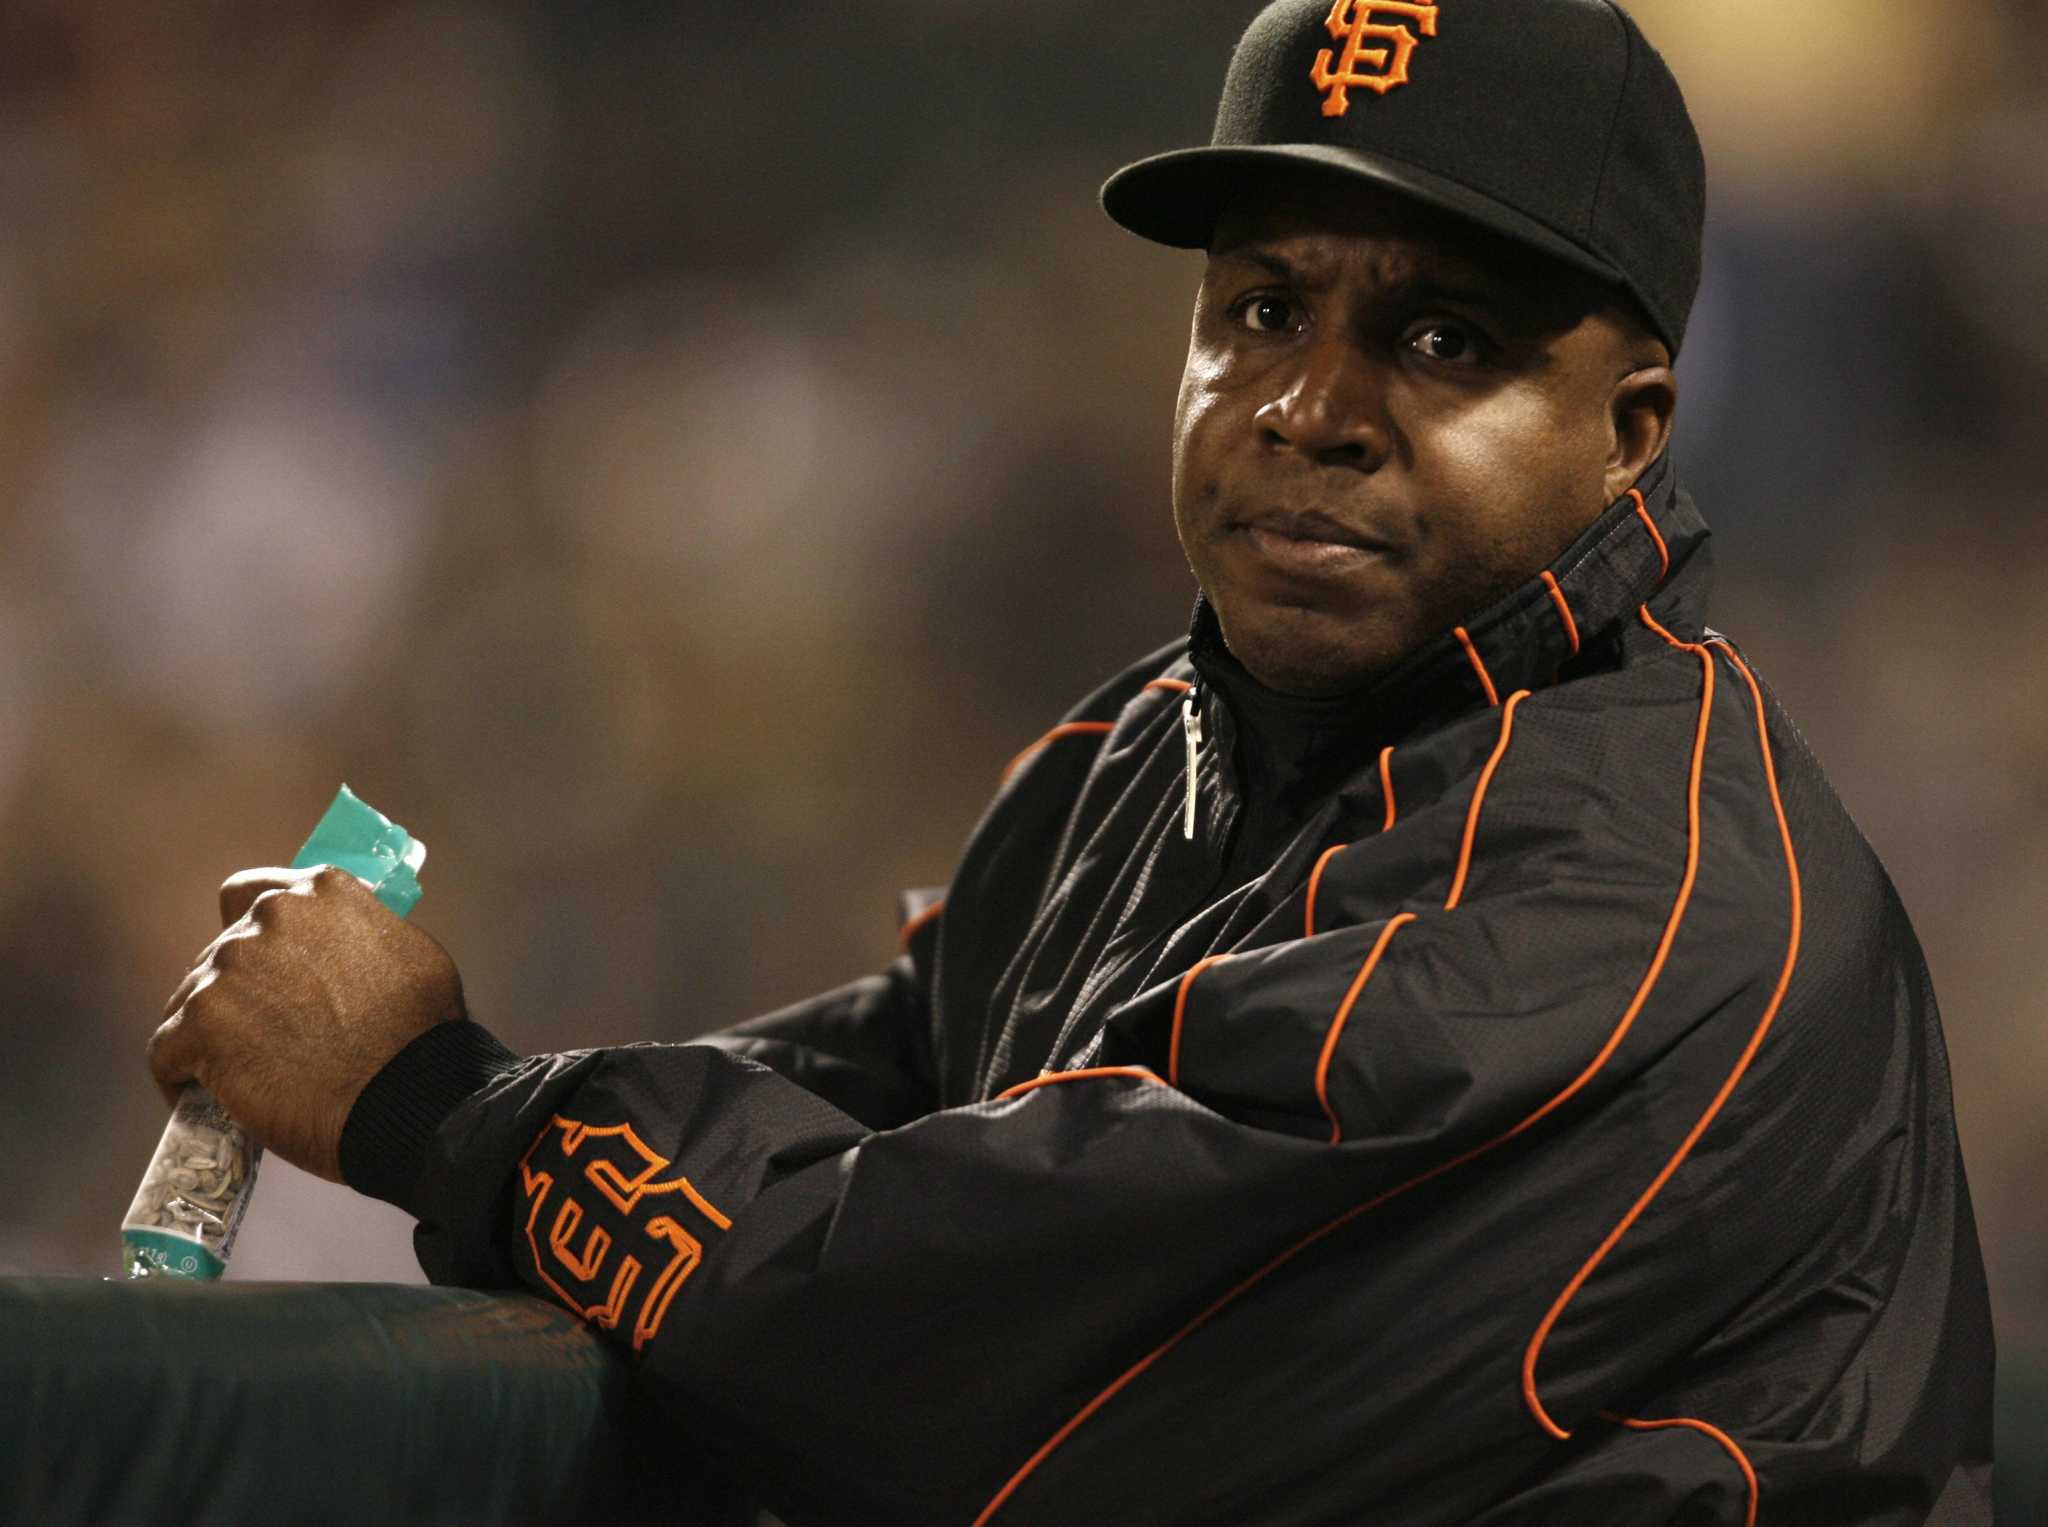 Barry Bonds and baseball's steroid era are neither forgotten nor forgiven